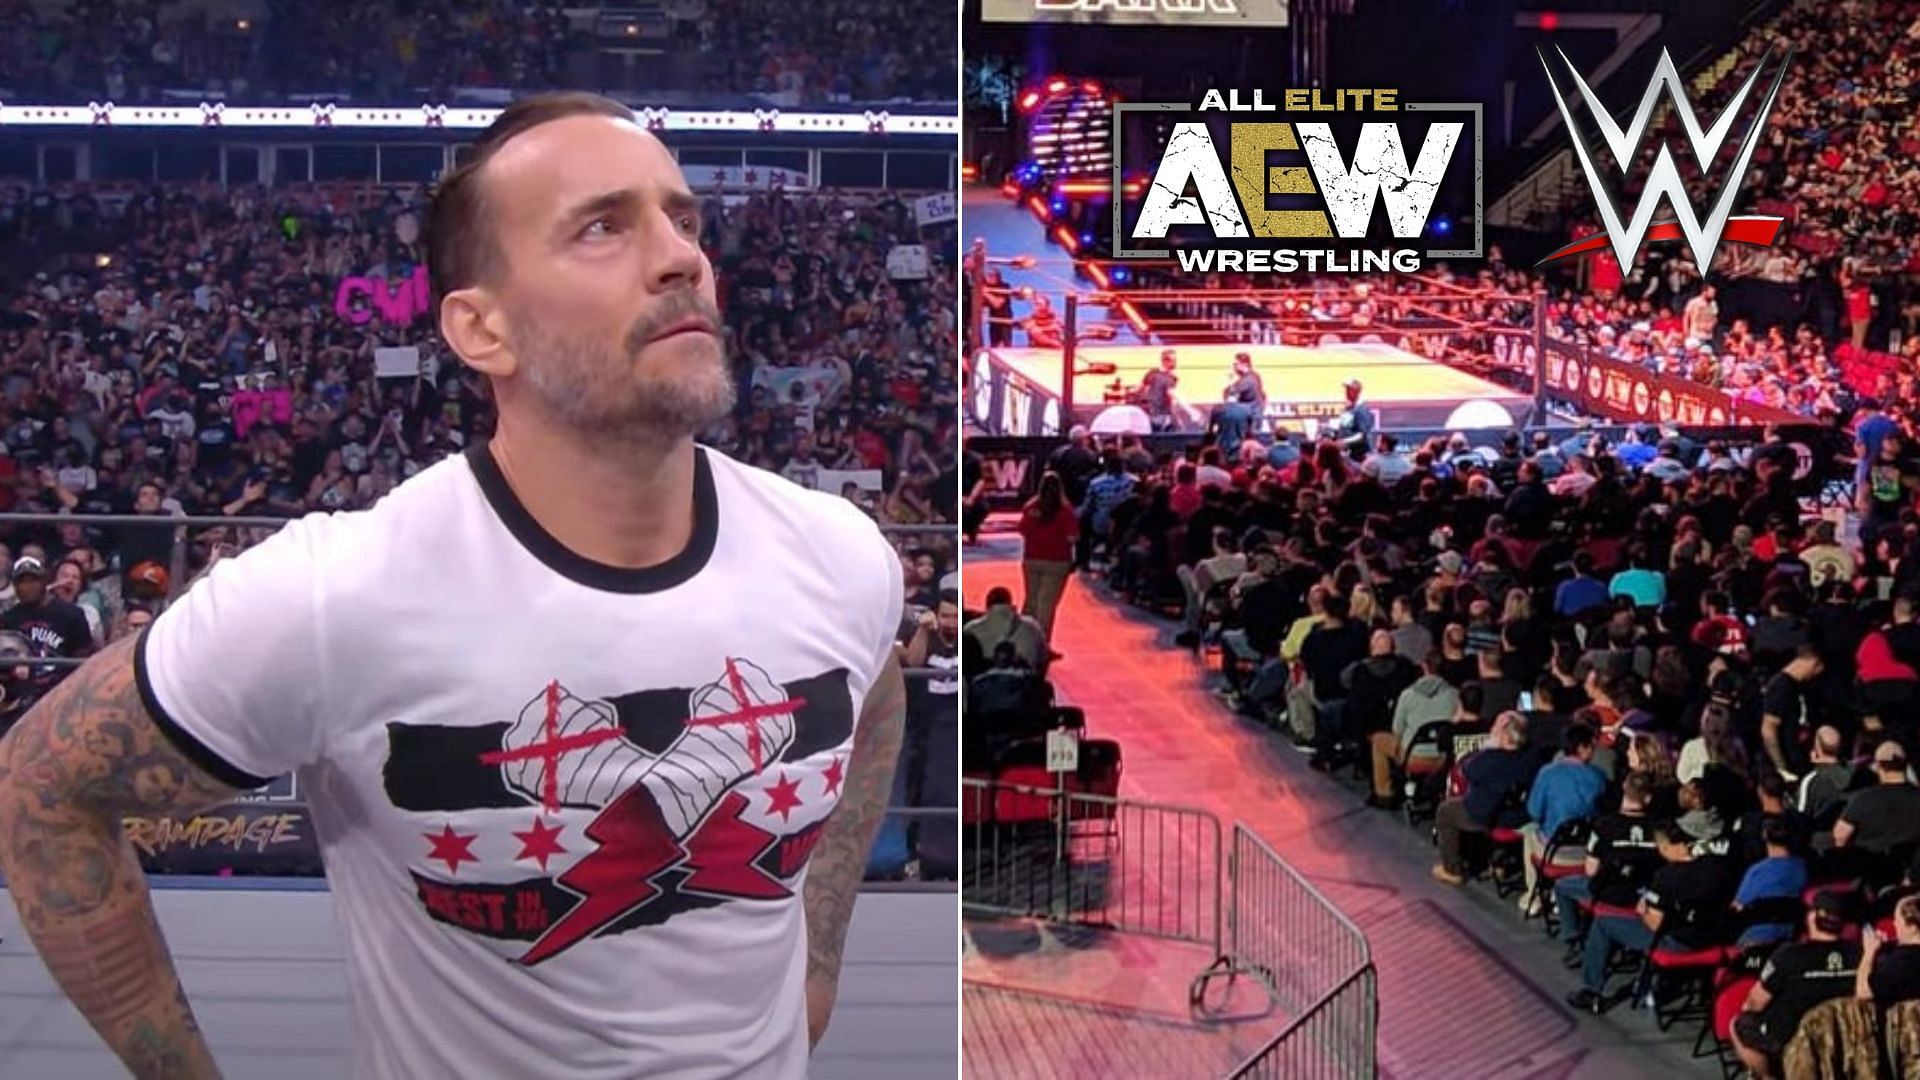 CM Punk has been away from AEW for a while now